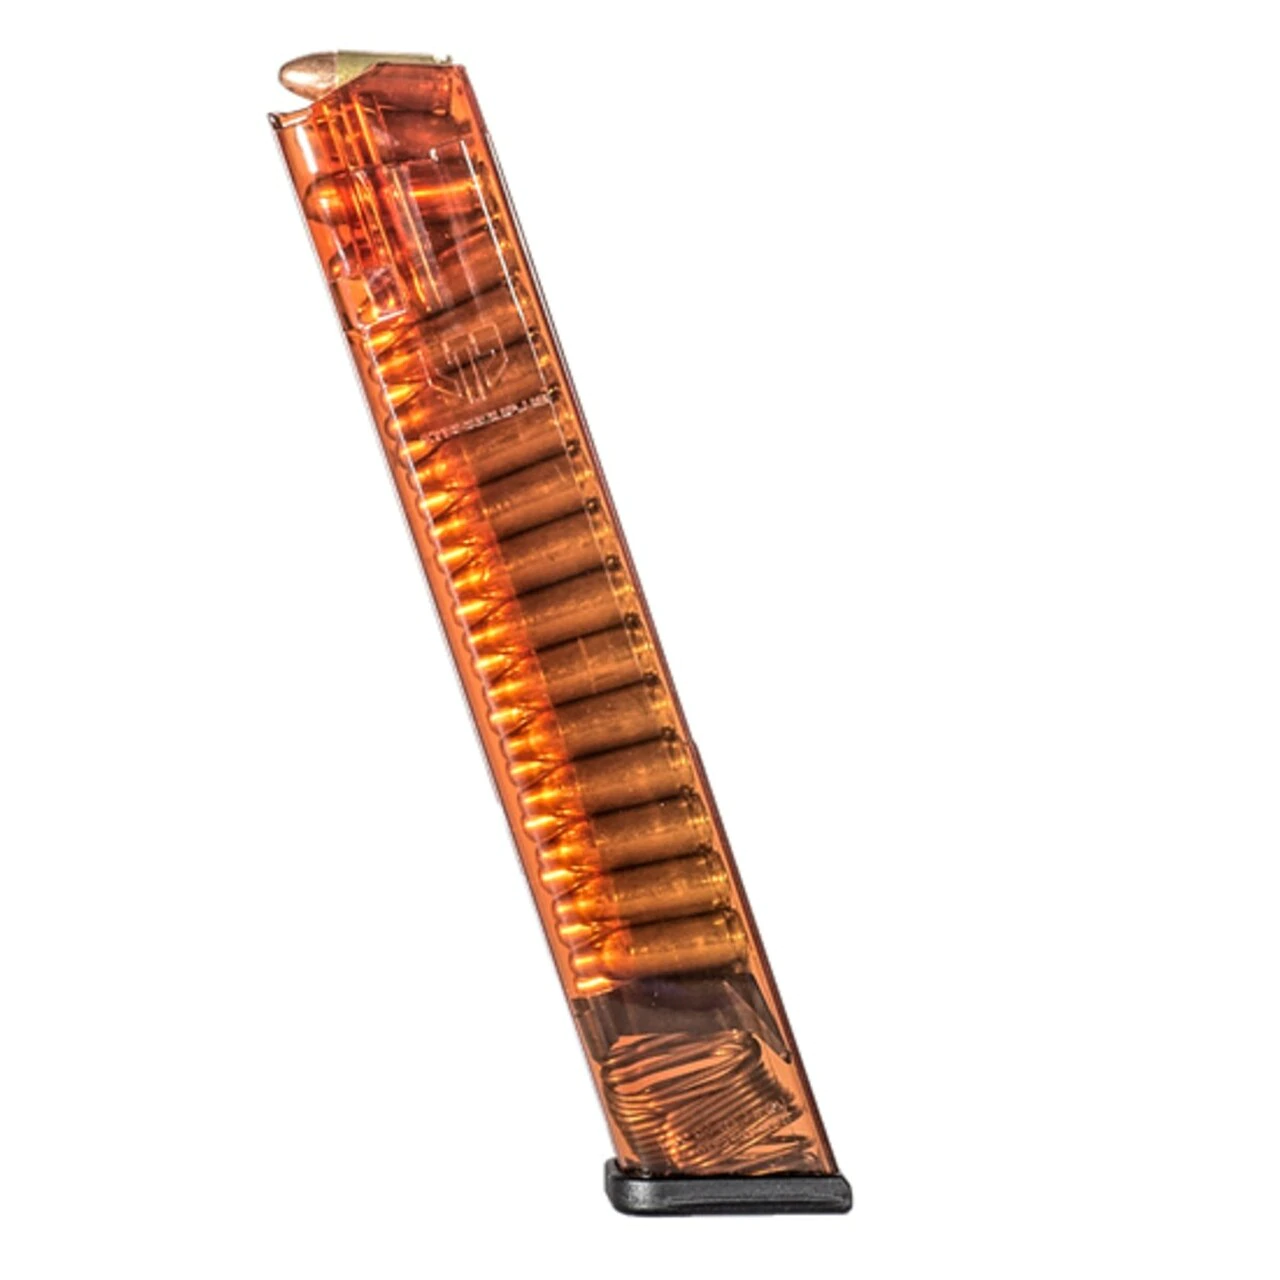 ETS Glock Pattern 9mm 31rd RED Magazines - $11.98